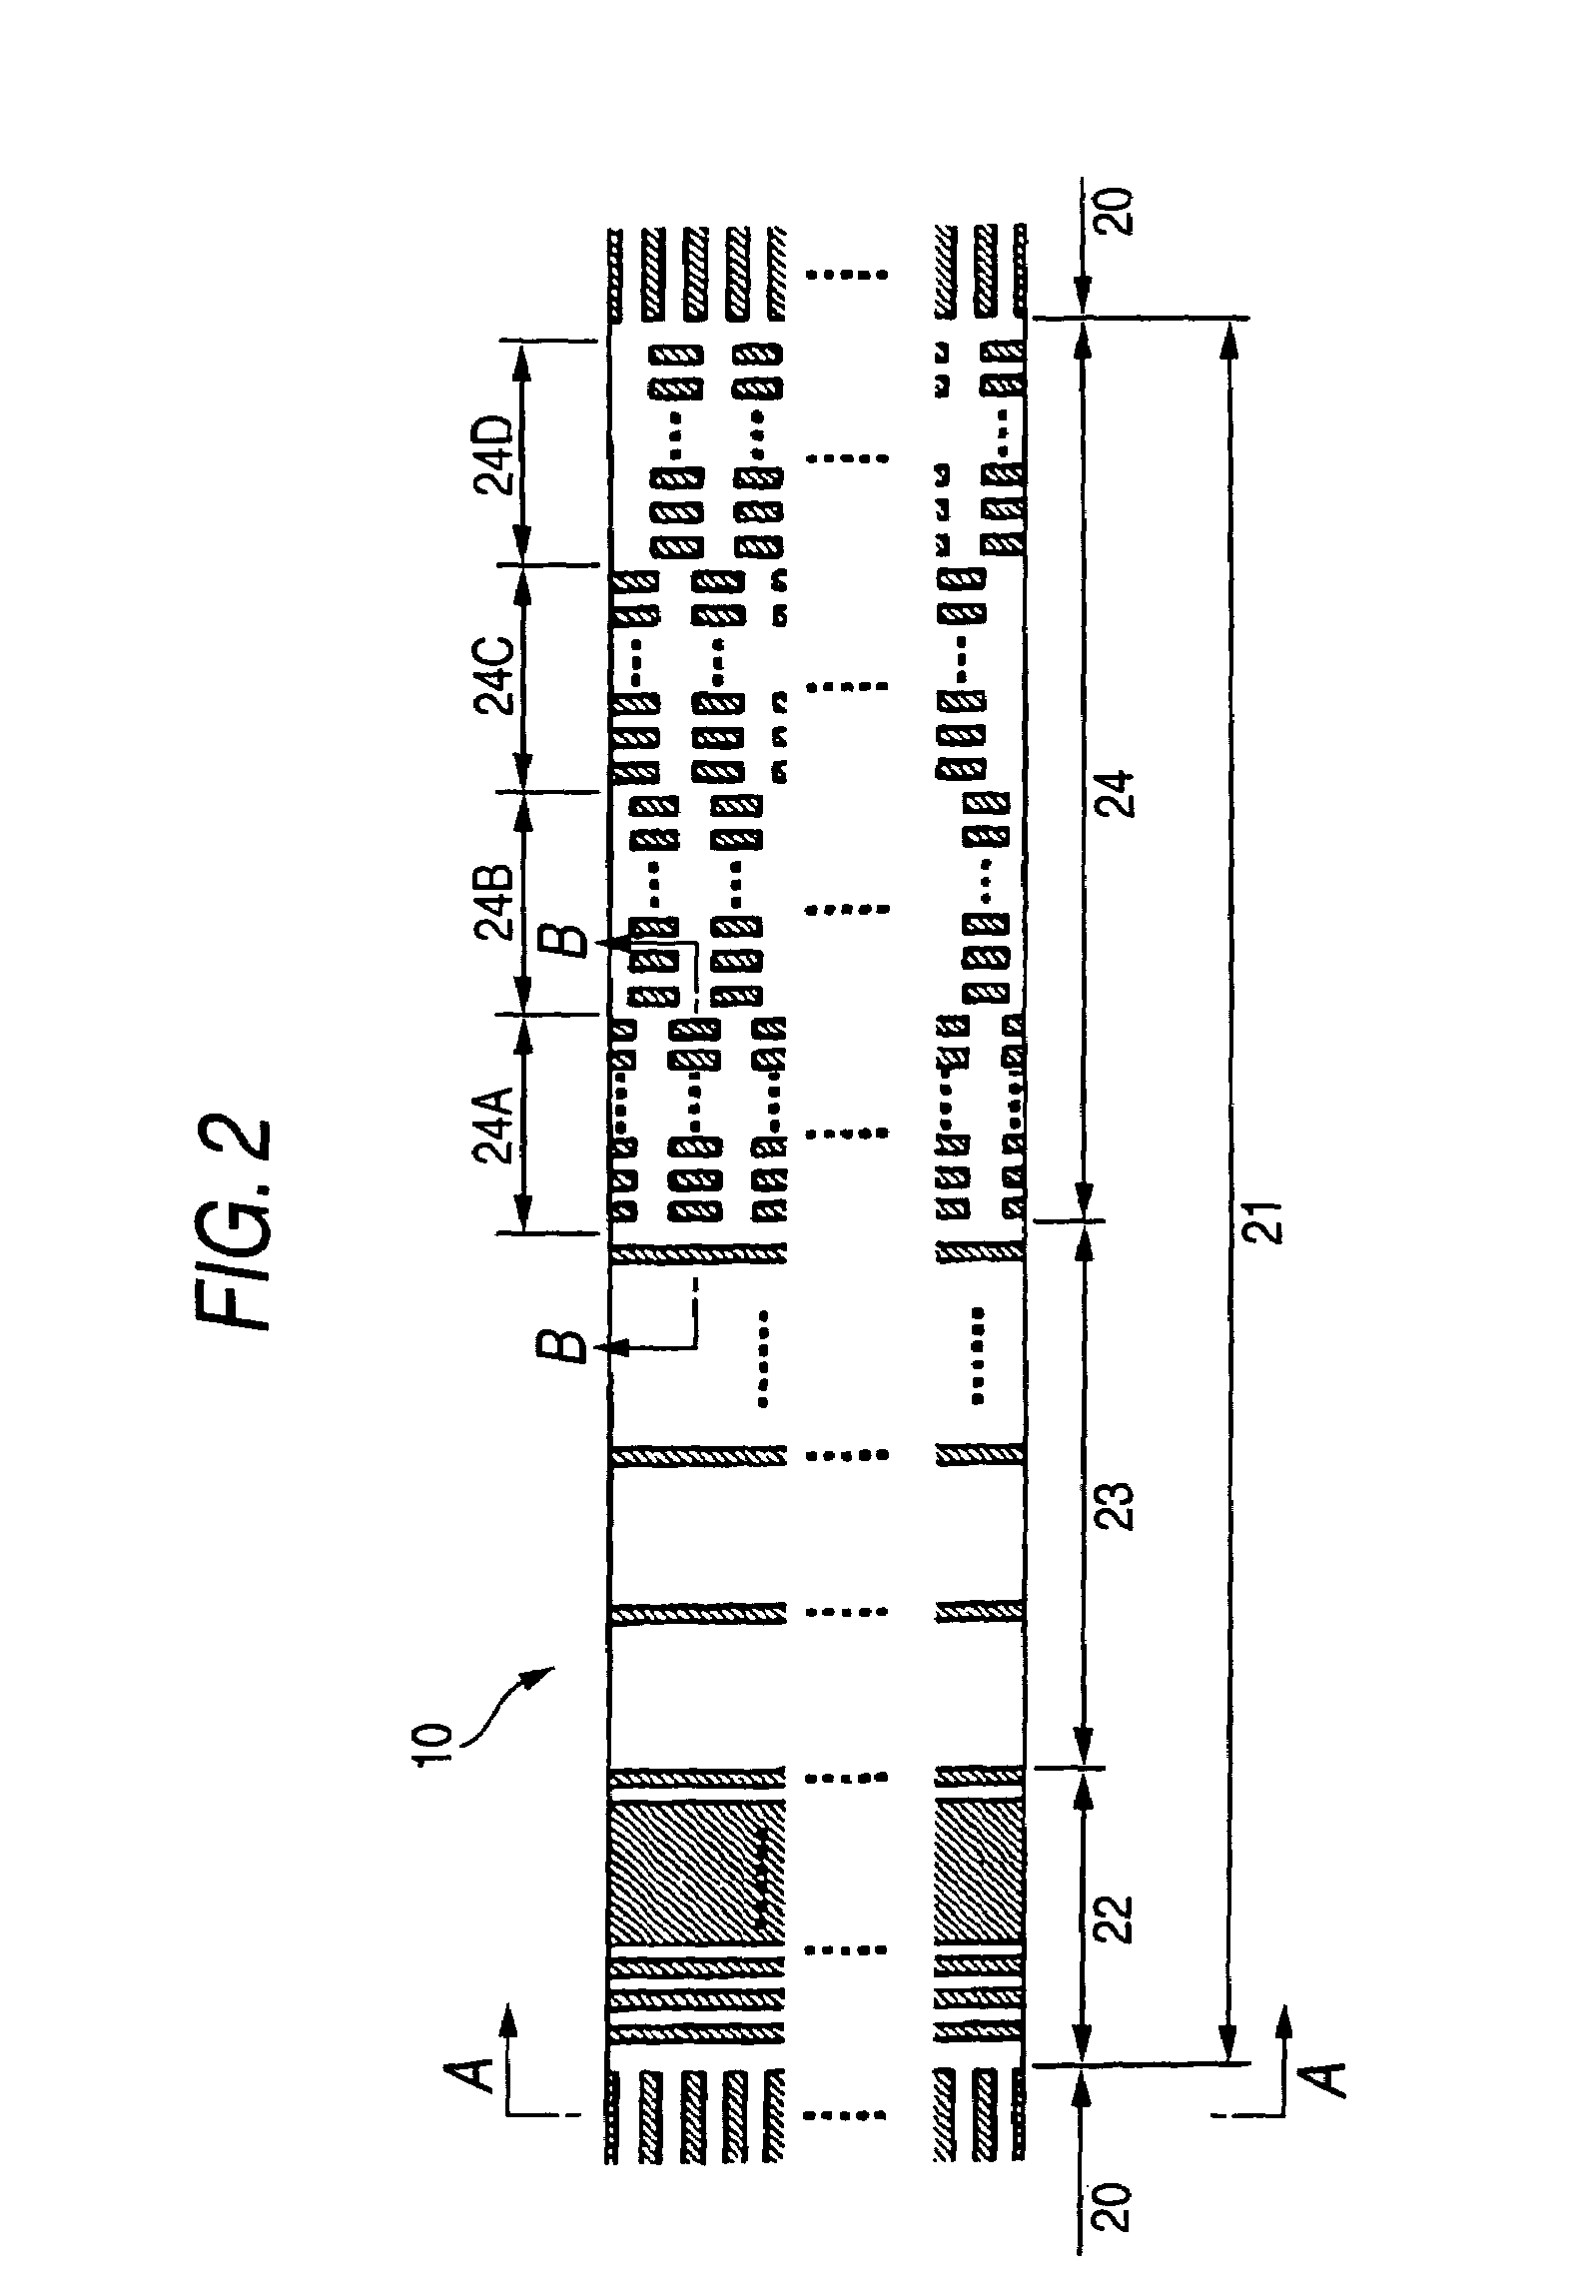 Magnetic recording medium having servo and data track regions with different arithmetical mean deviations